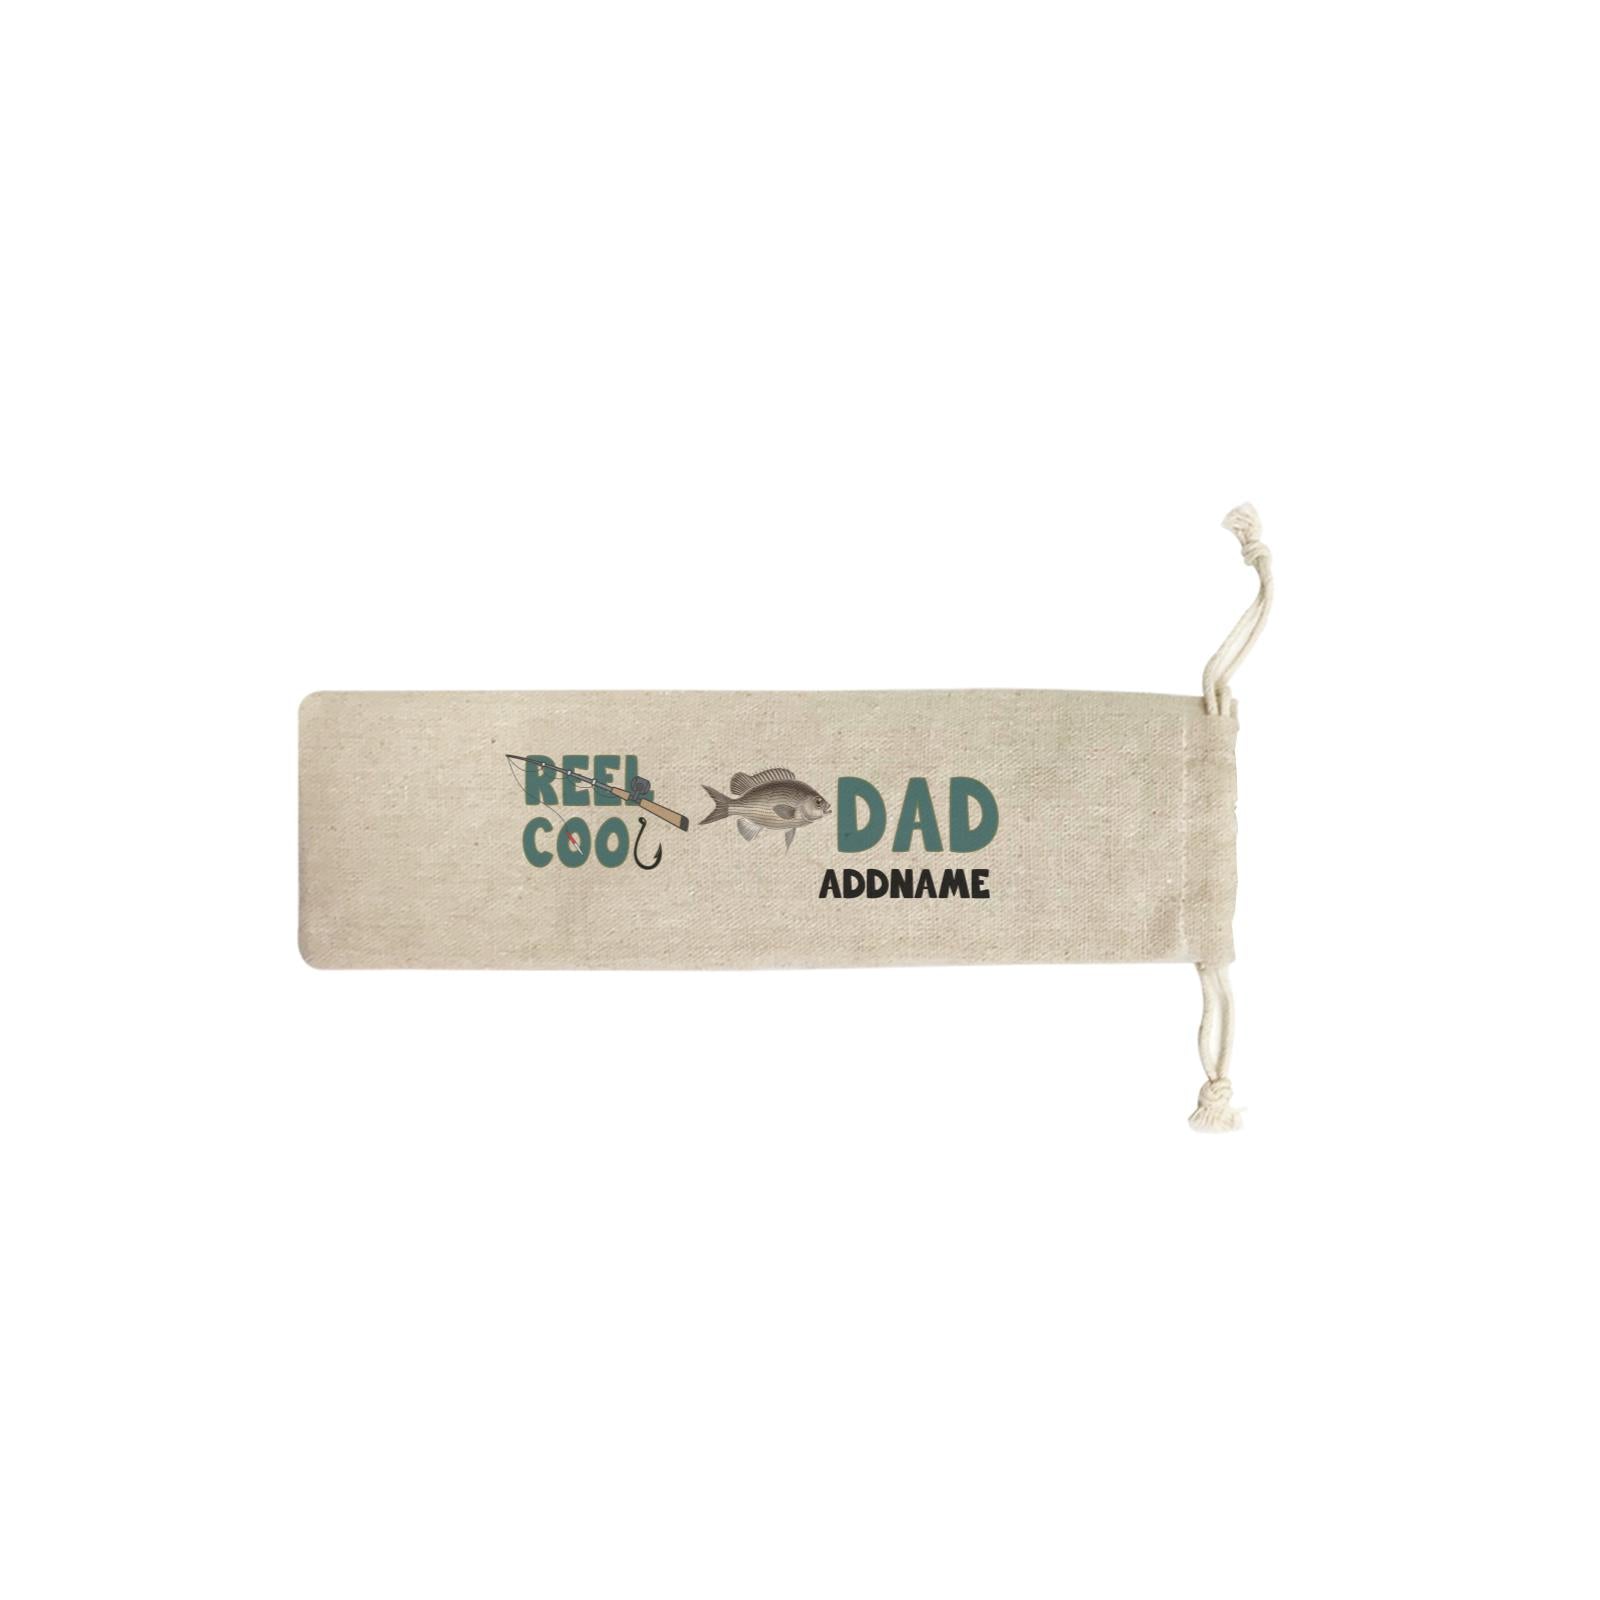 Reel Cool Dad Addname SB Straw Pouch (No Straws included)